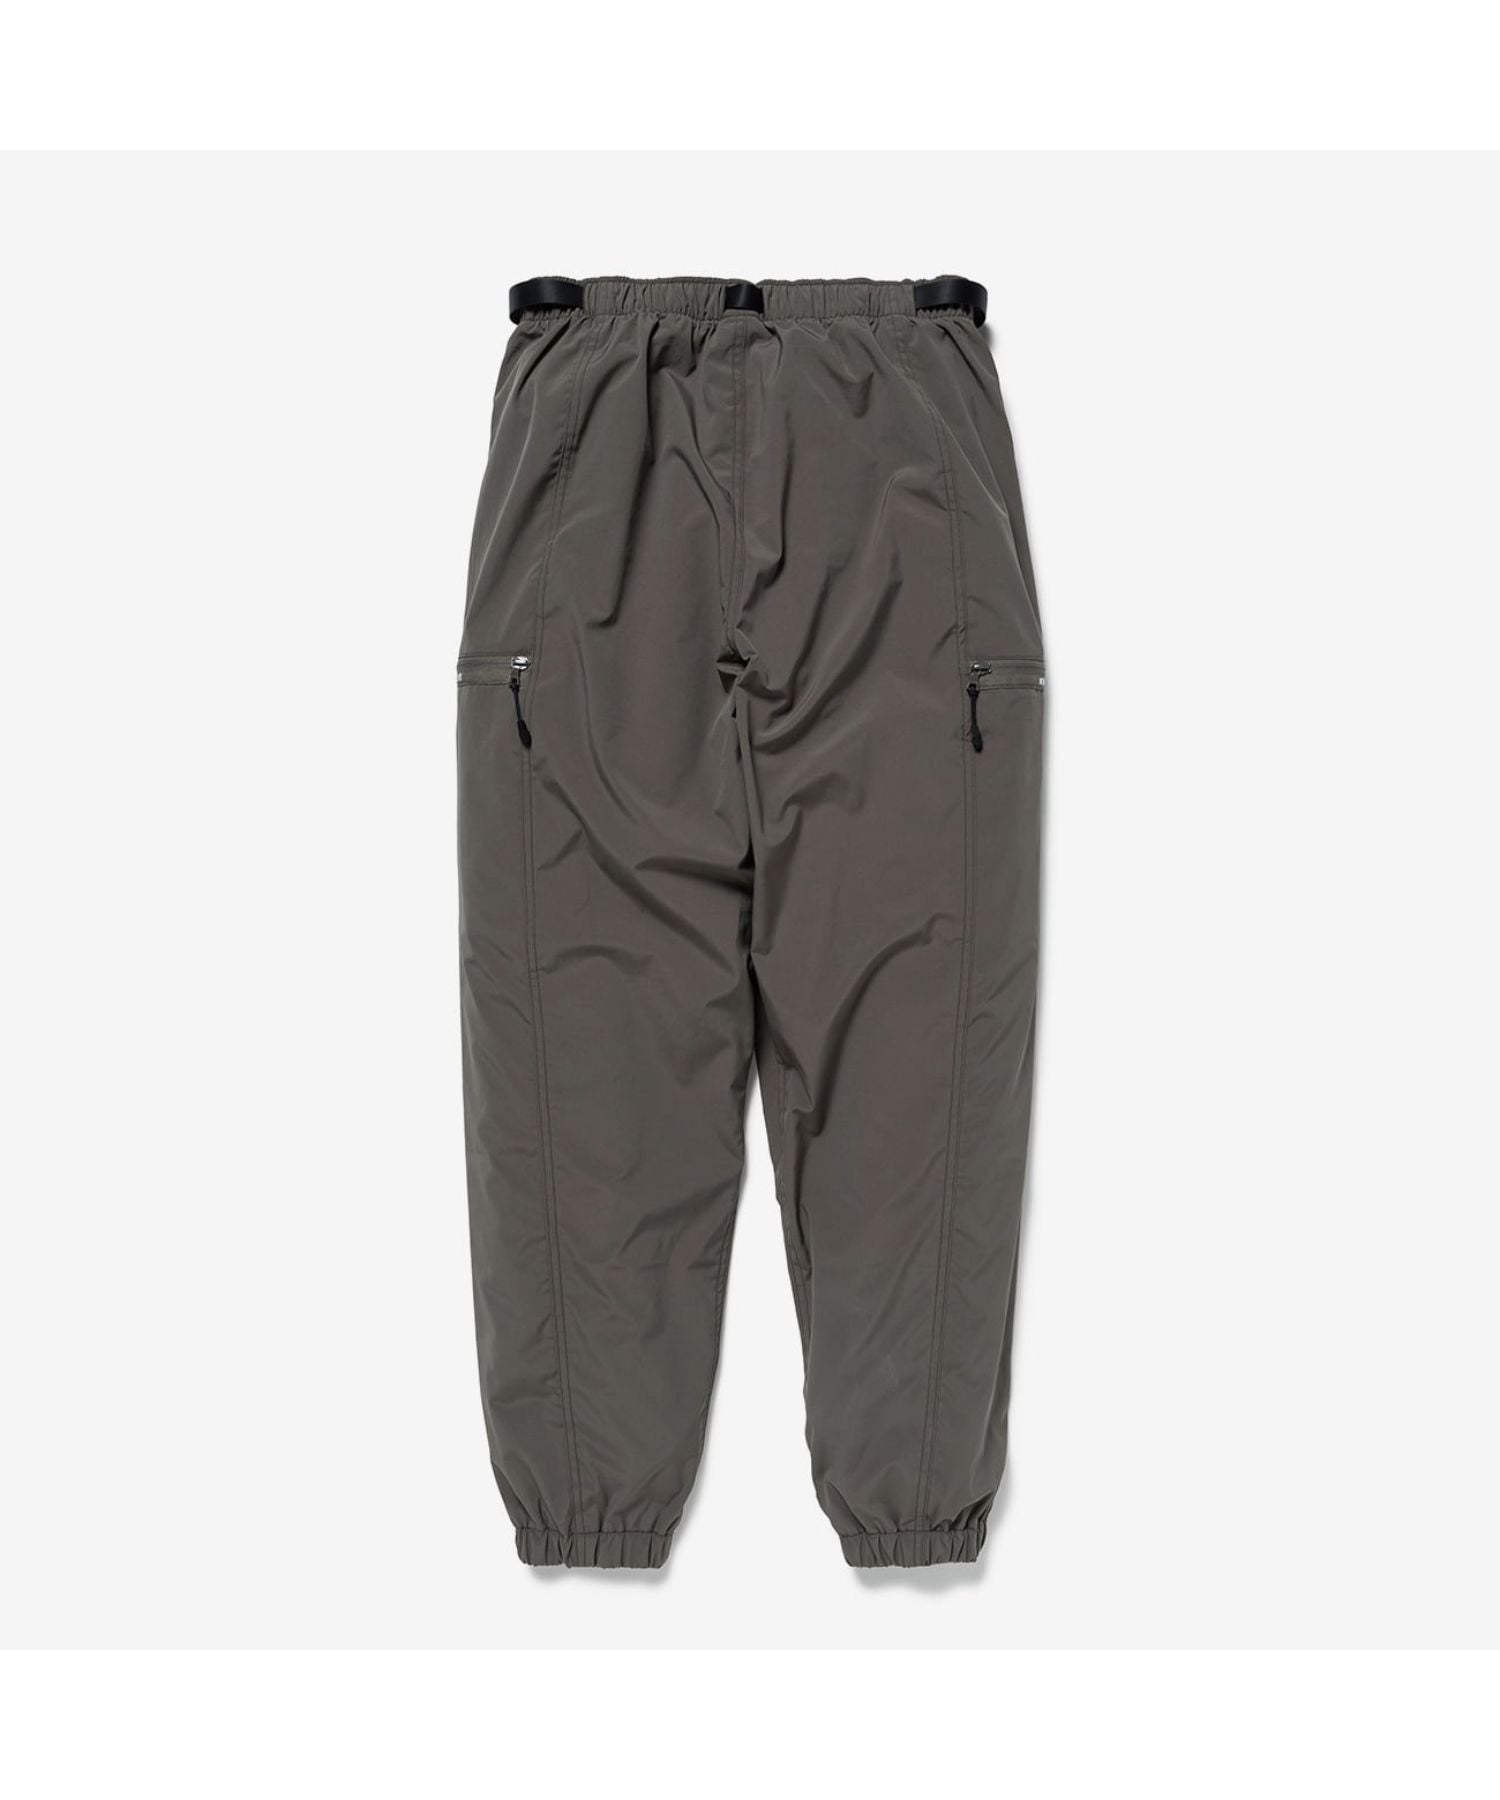 SPST2002 / TROUSERS / POLY. TUSSAH